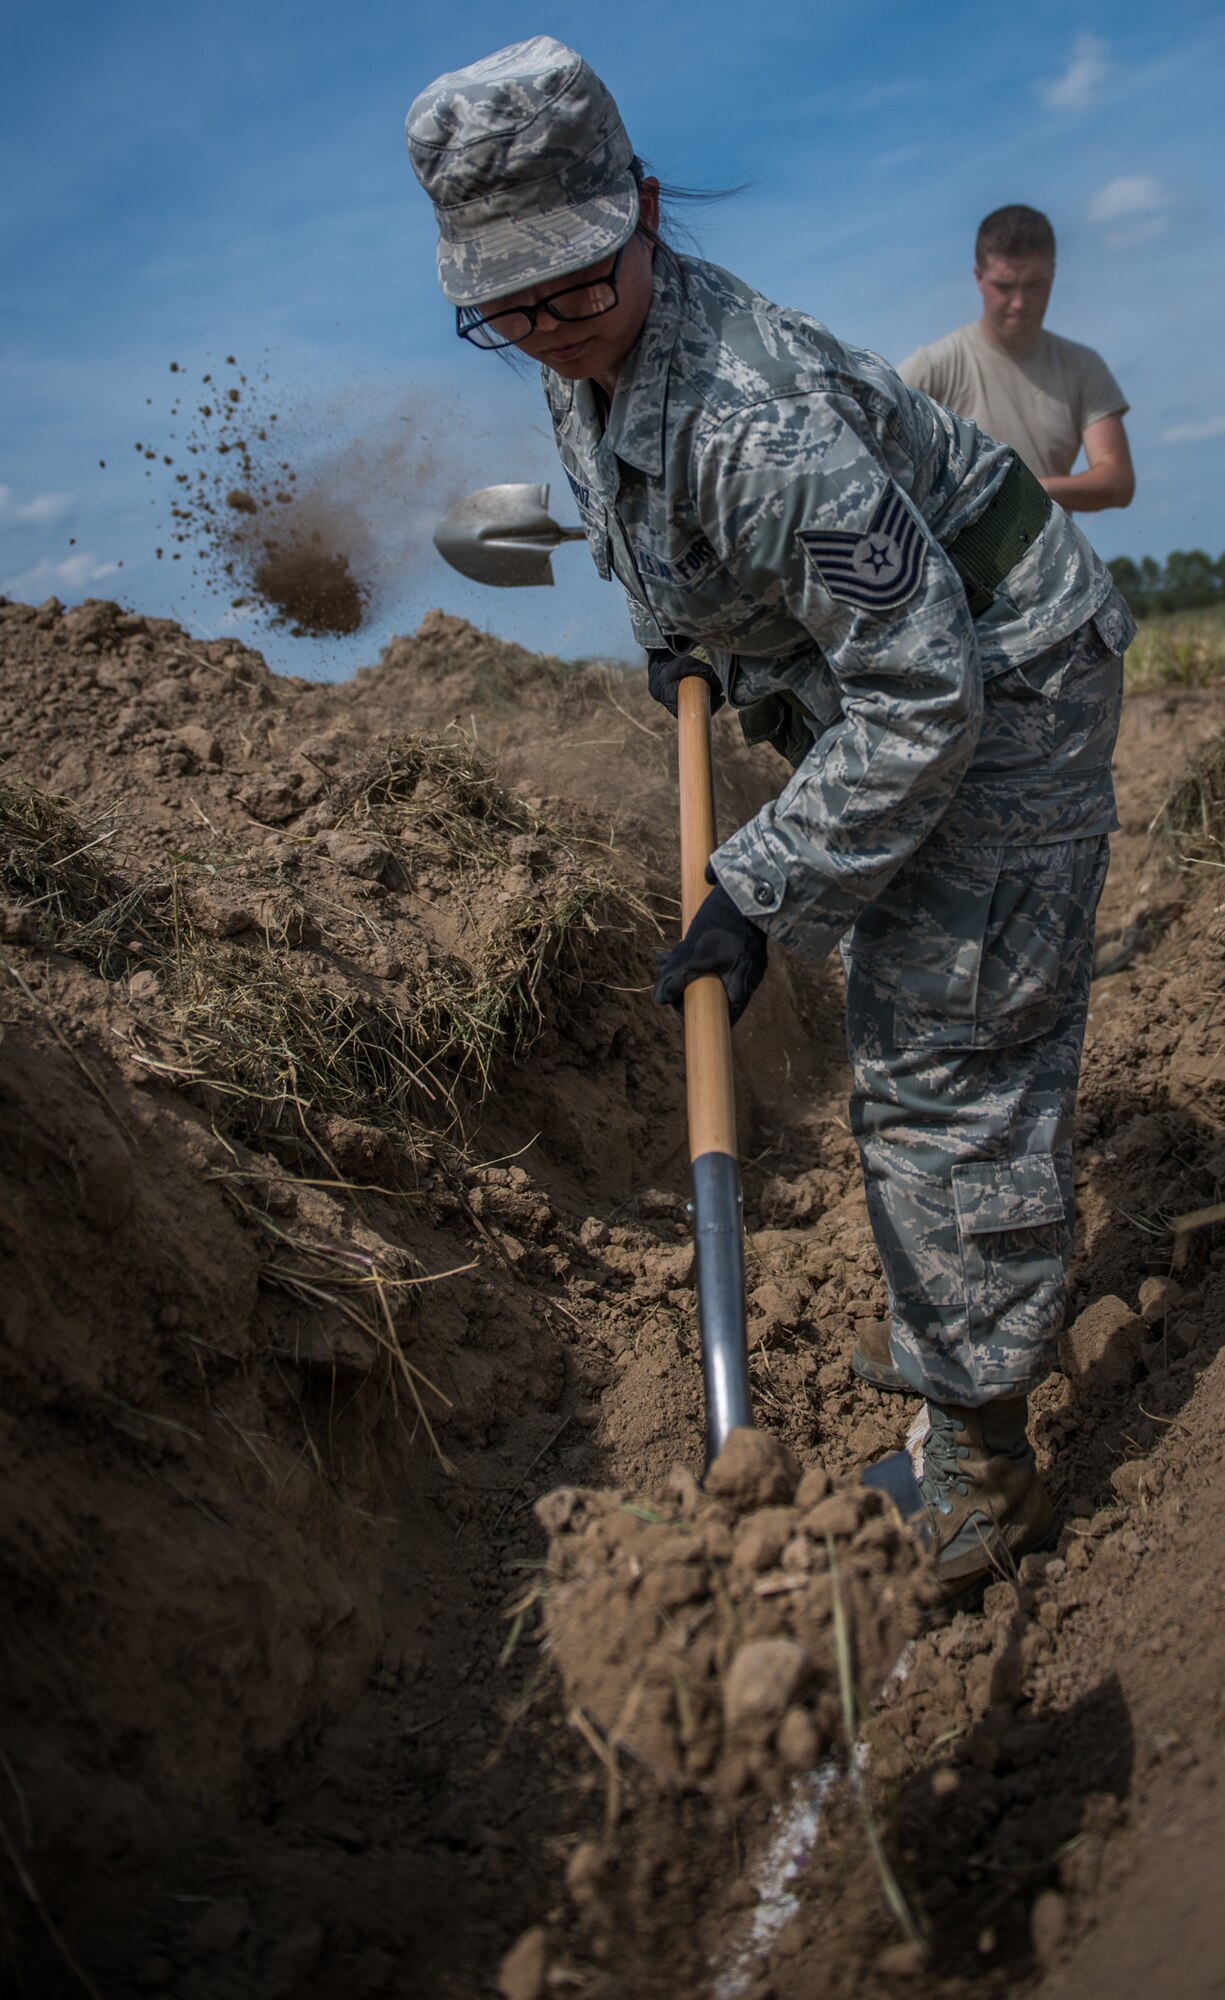 932nd Civil Engineer technician, Tech. Sgt. Tiana Corpuz, with help from fellow Reserve Citizen Airman Senior Airman Alex Ravenmeder,  uses a shovel to uncover a plastic pipe simulating a pressurized water-main  during field training, Sept. 10, 2019 at the Sparta National Guard training area, Sparta, Illinois. (U.S. Air Force photo by Master Sgt. Christopher Parr)